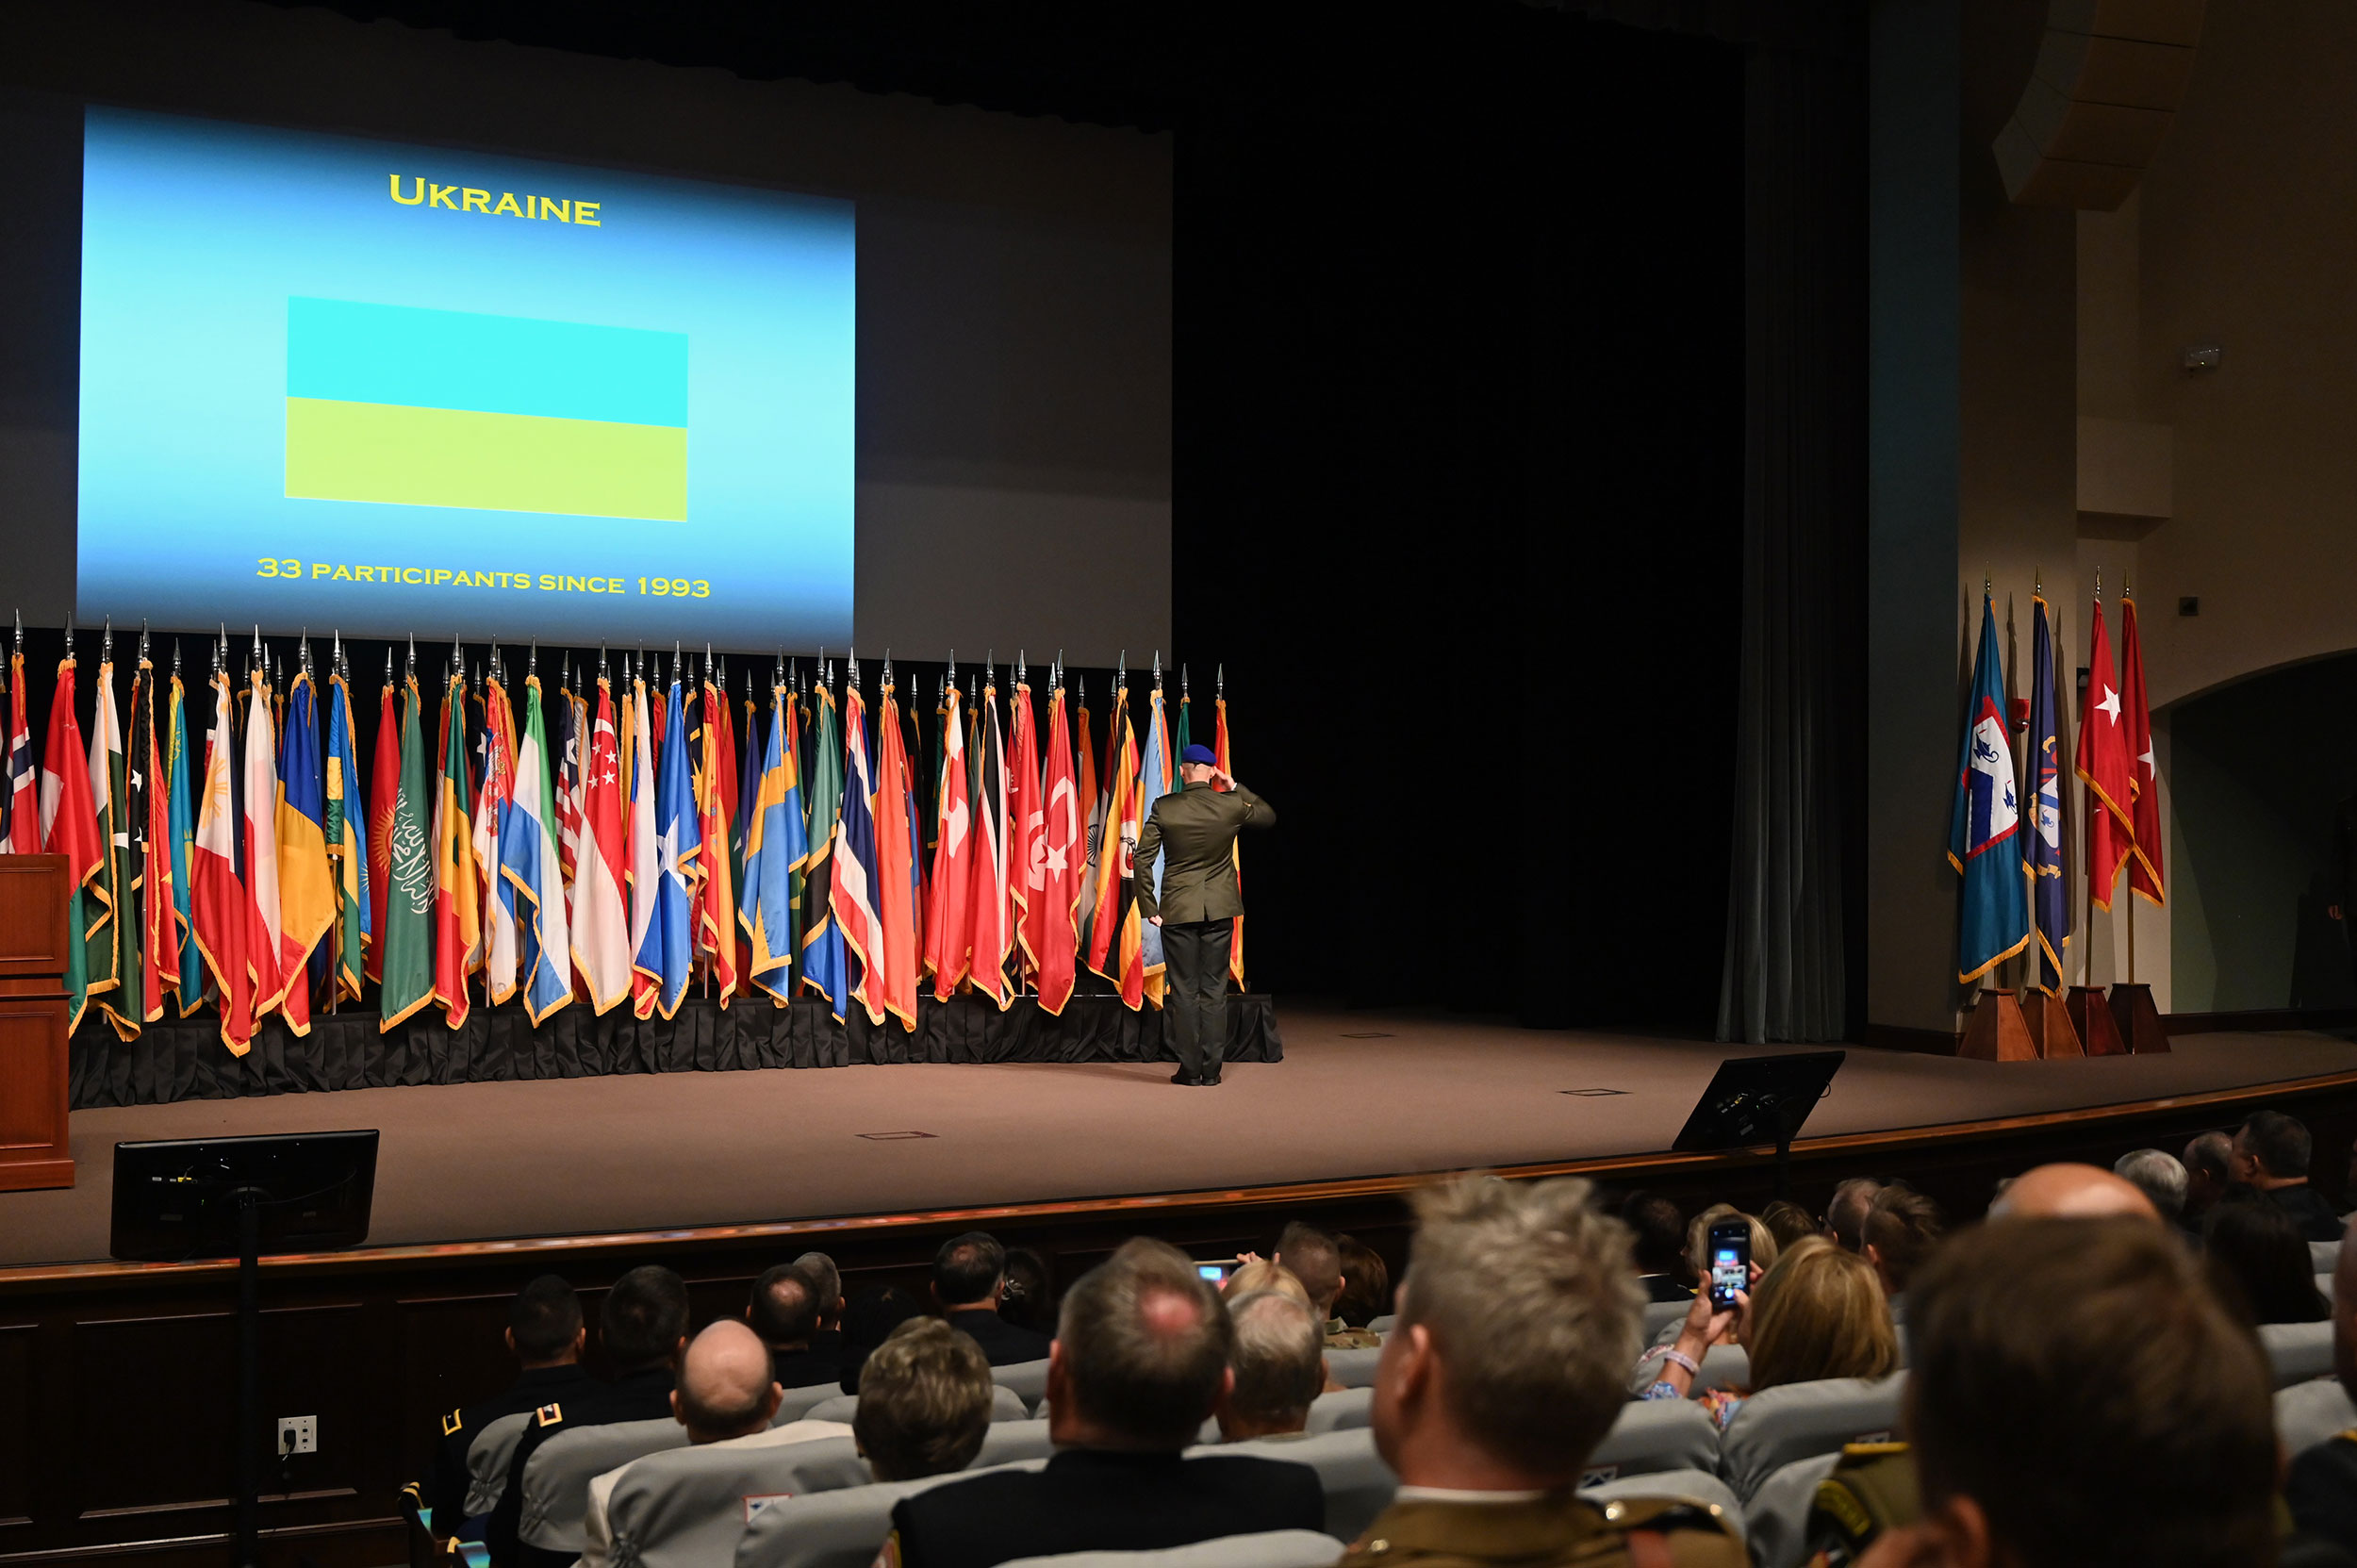 The international military student from Ukraine salutes after posting his nation’s flag during the 2023 International Flag Ceremony on Aug. 8, 2022 in the Eisenhower Auditorium of the Lewis and Clark Center.